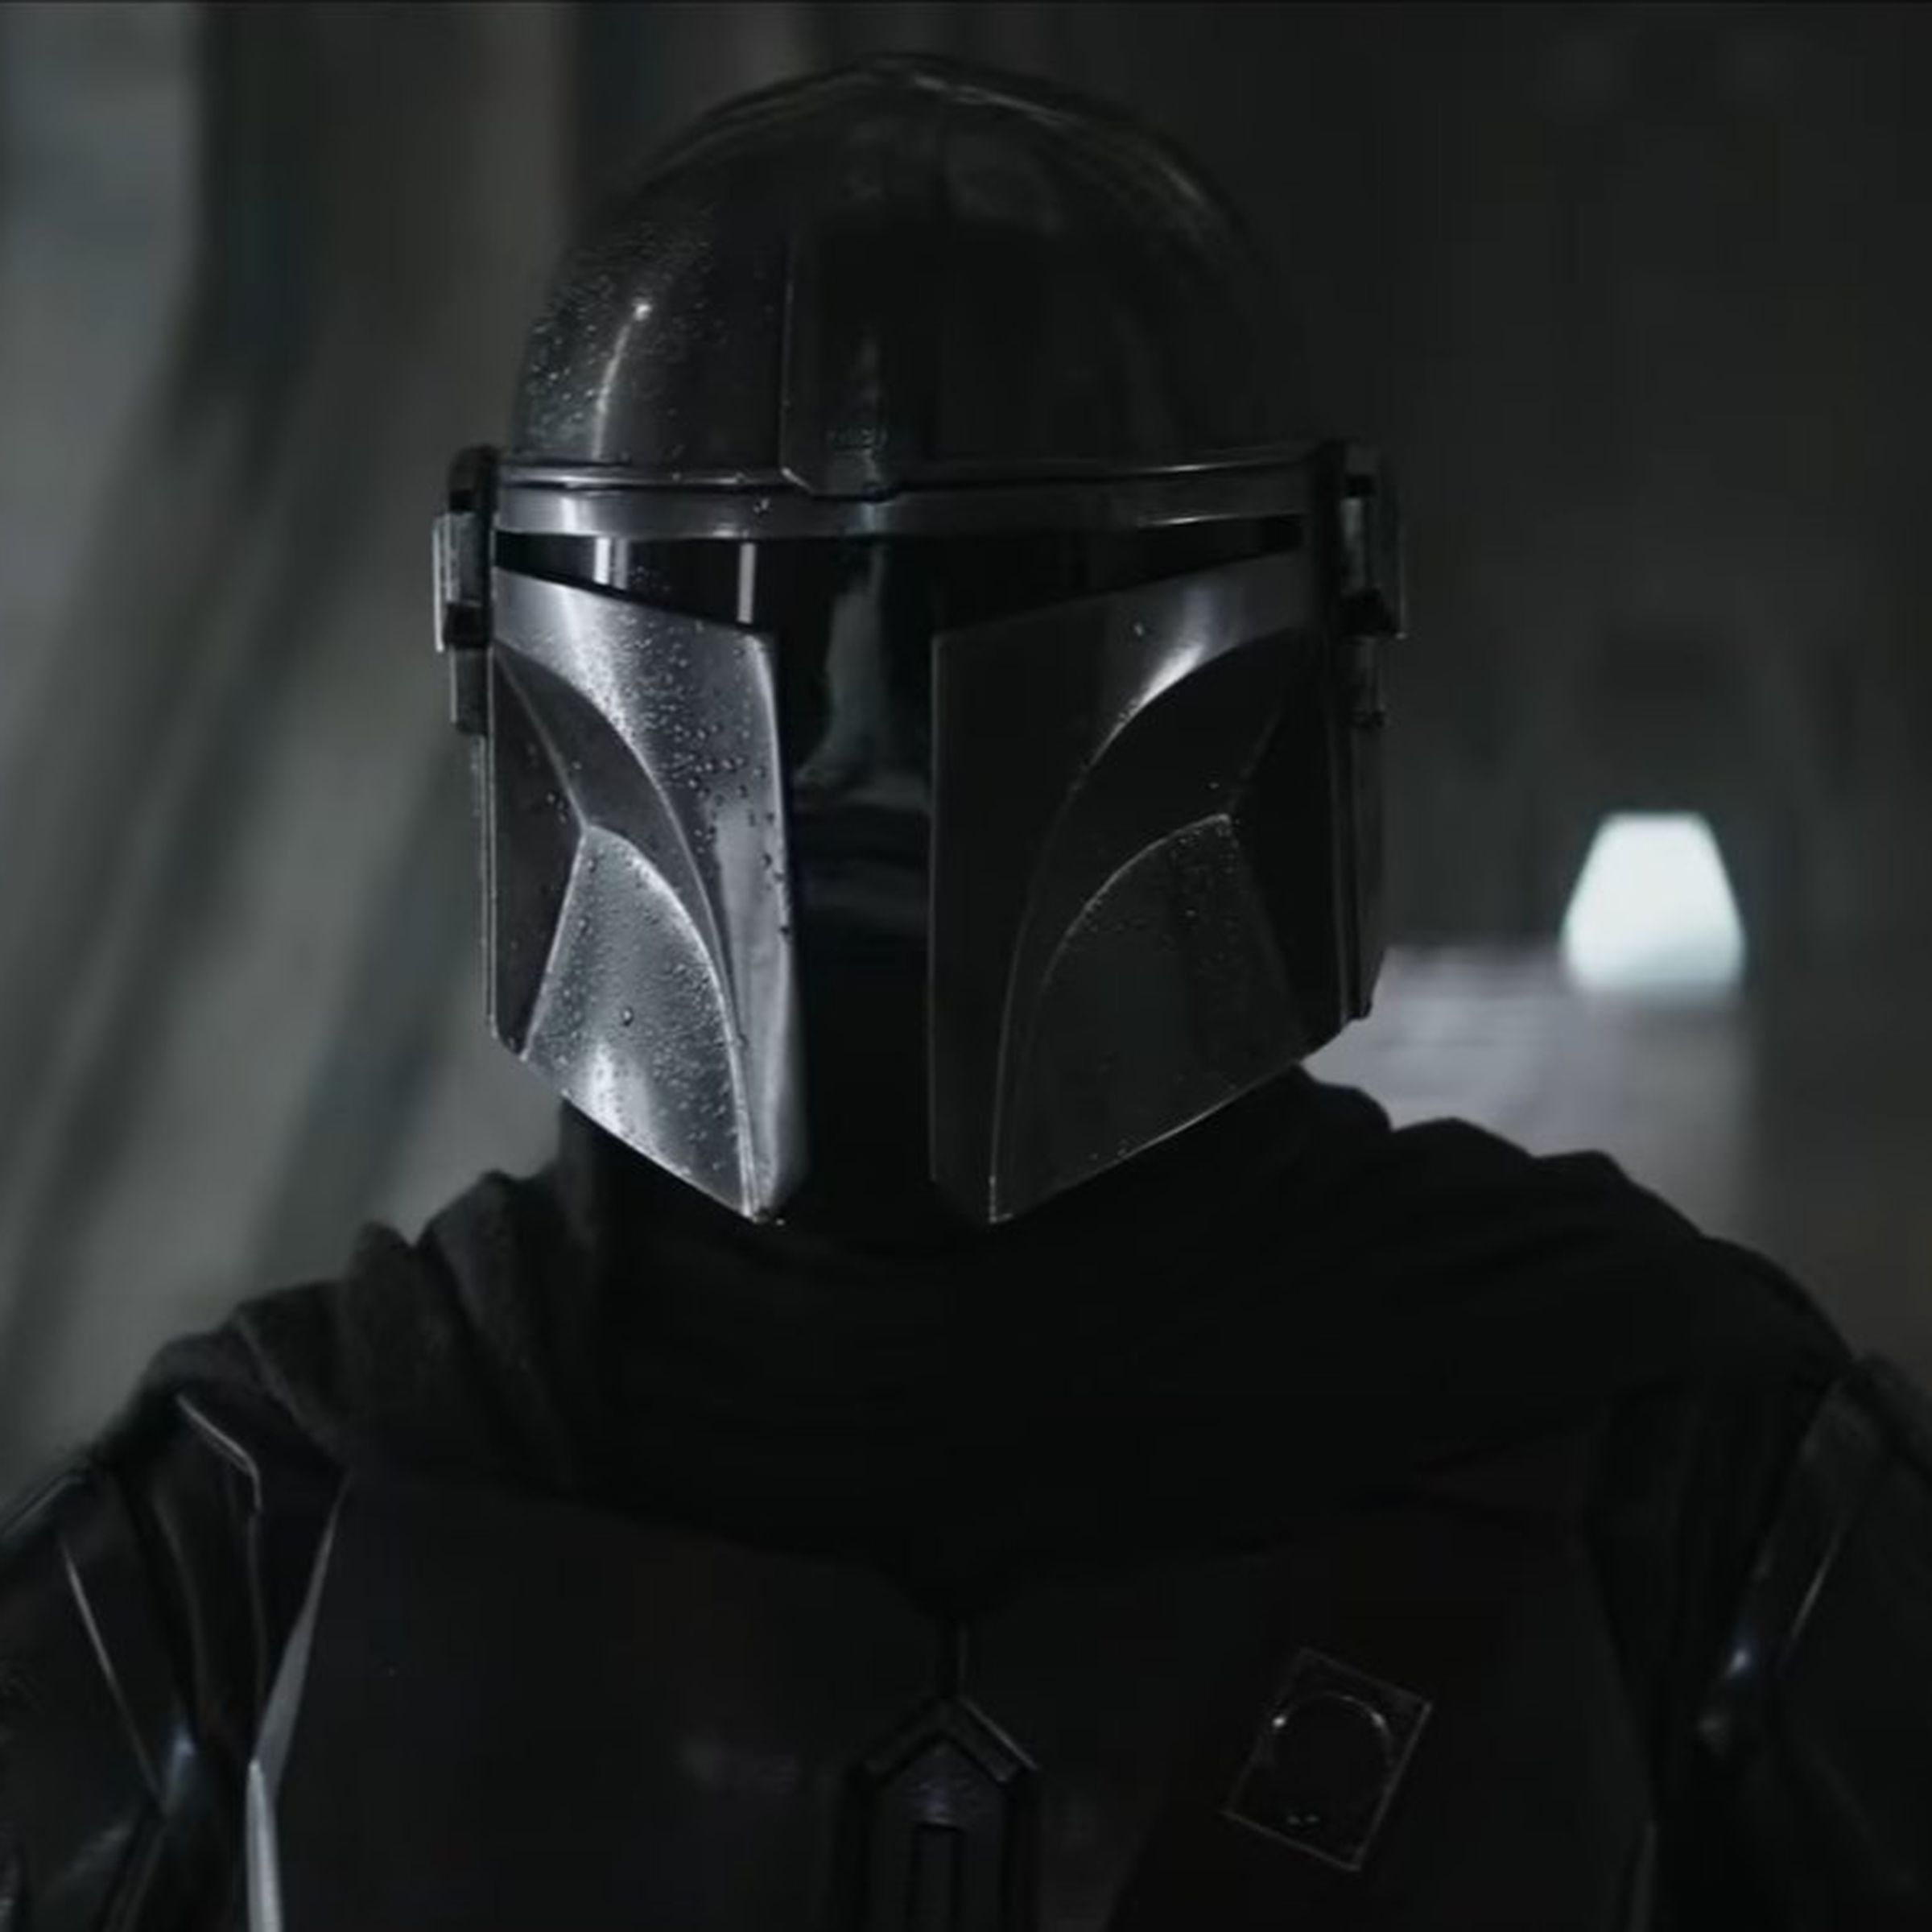 Still image of The Mandalorian, with visible droplets of water on his shiny helmet